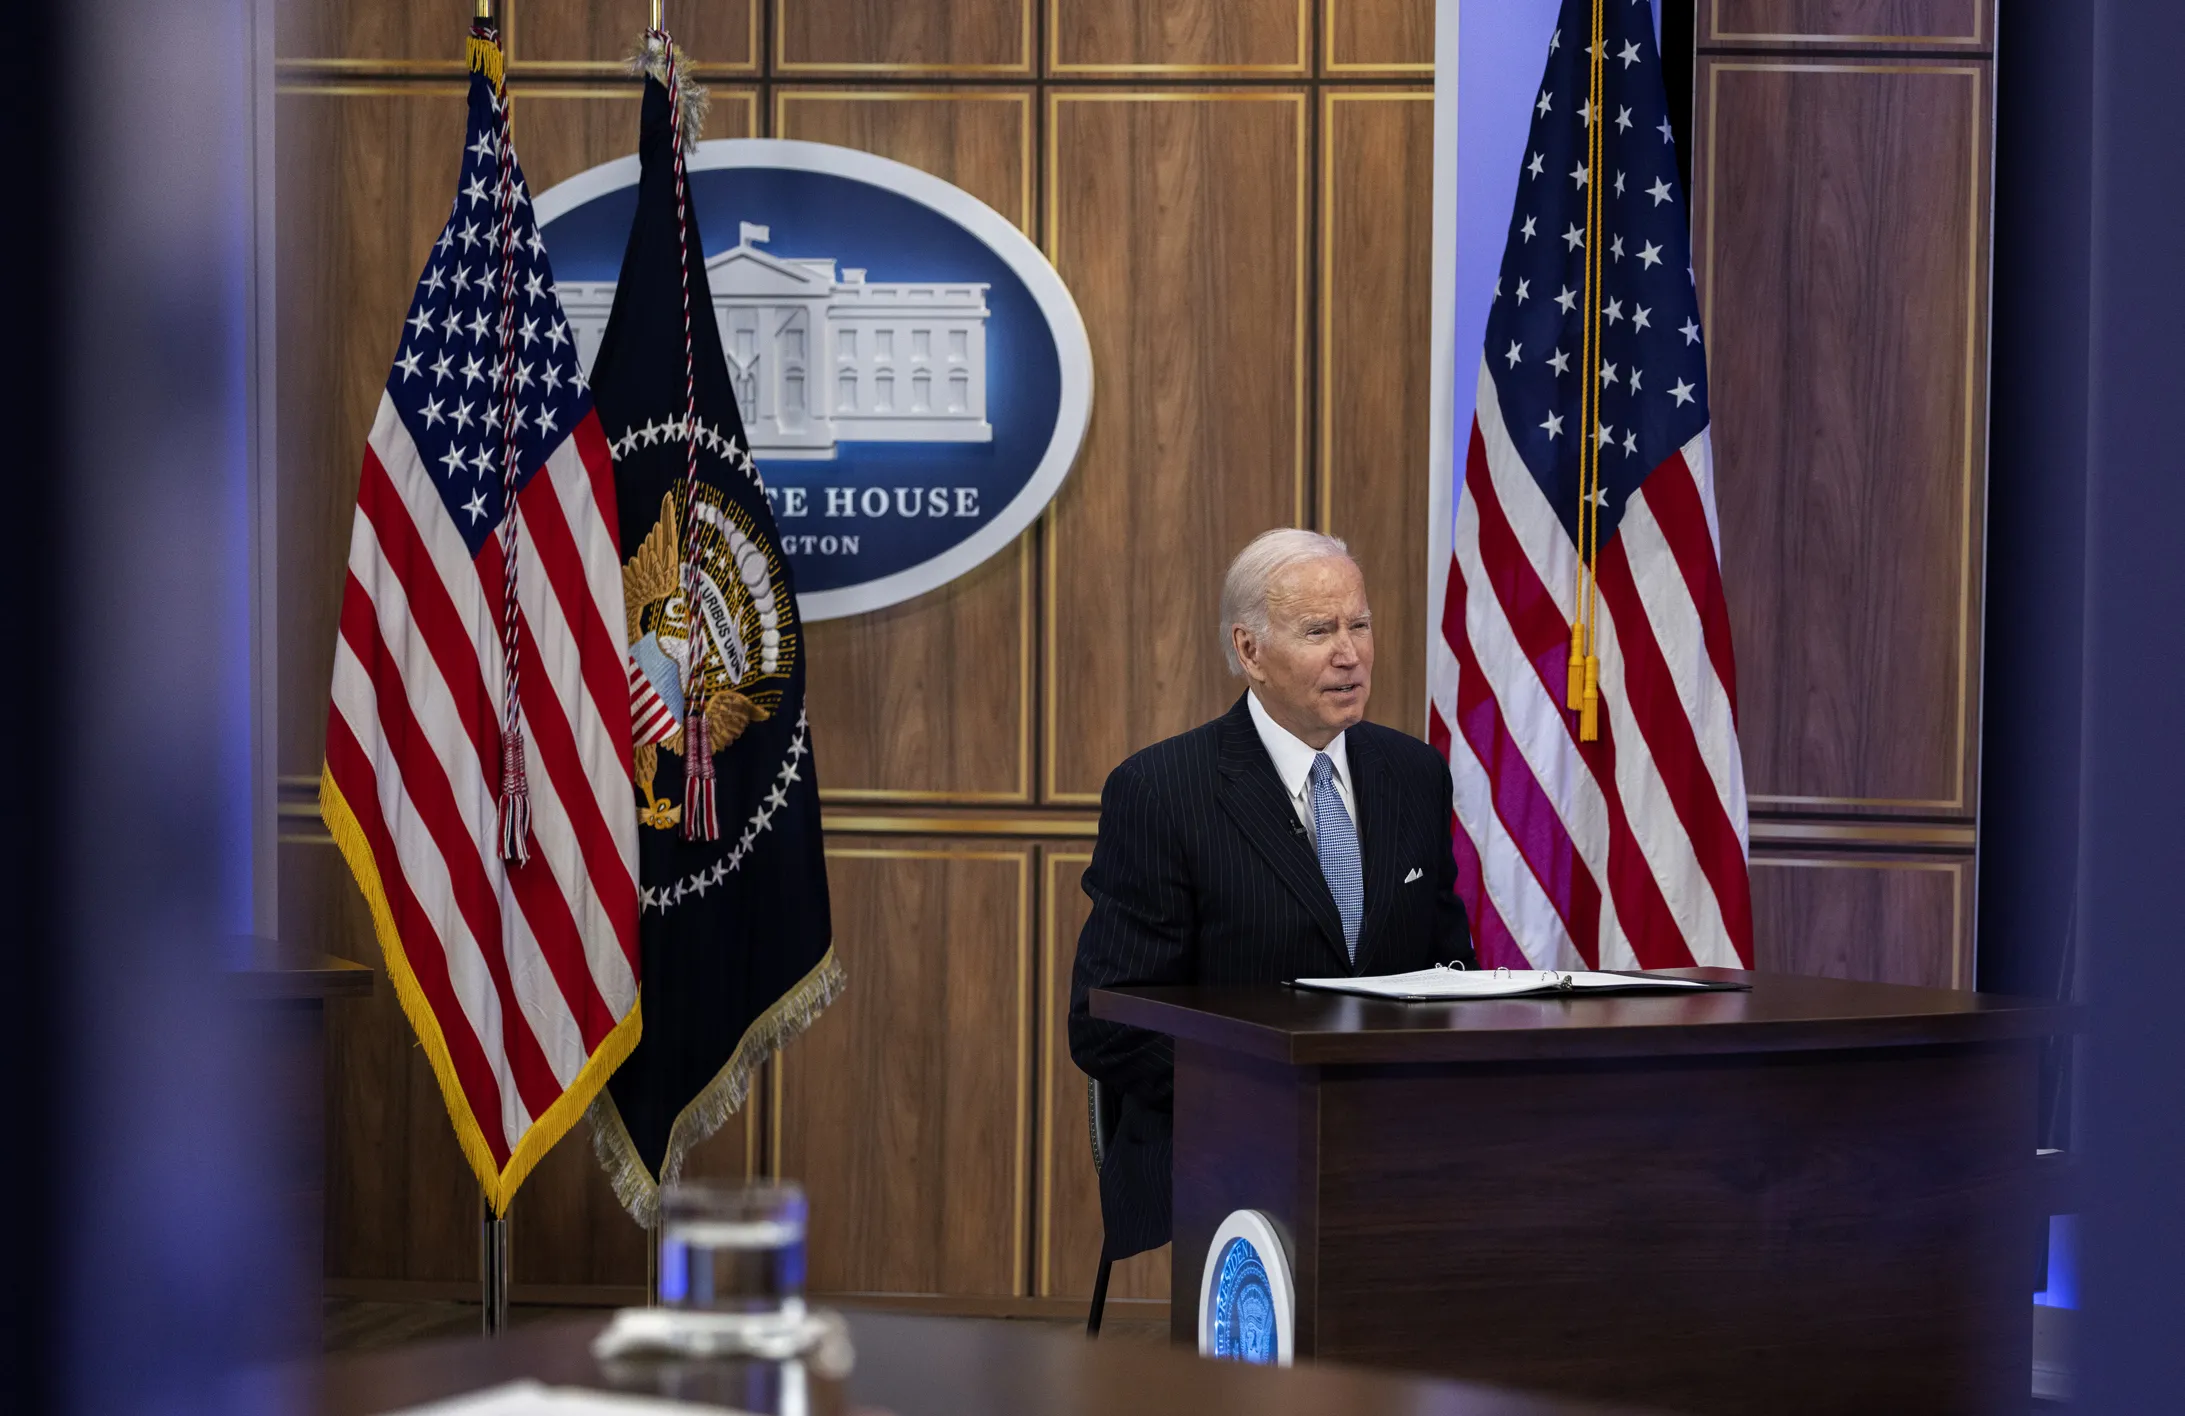 Biden Extends Student Loan Payment Pause Again as Lawsuits Stall Debt Relief